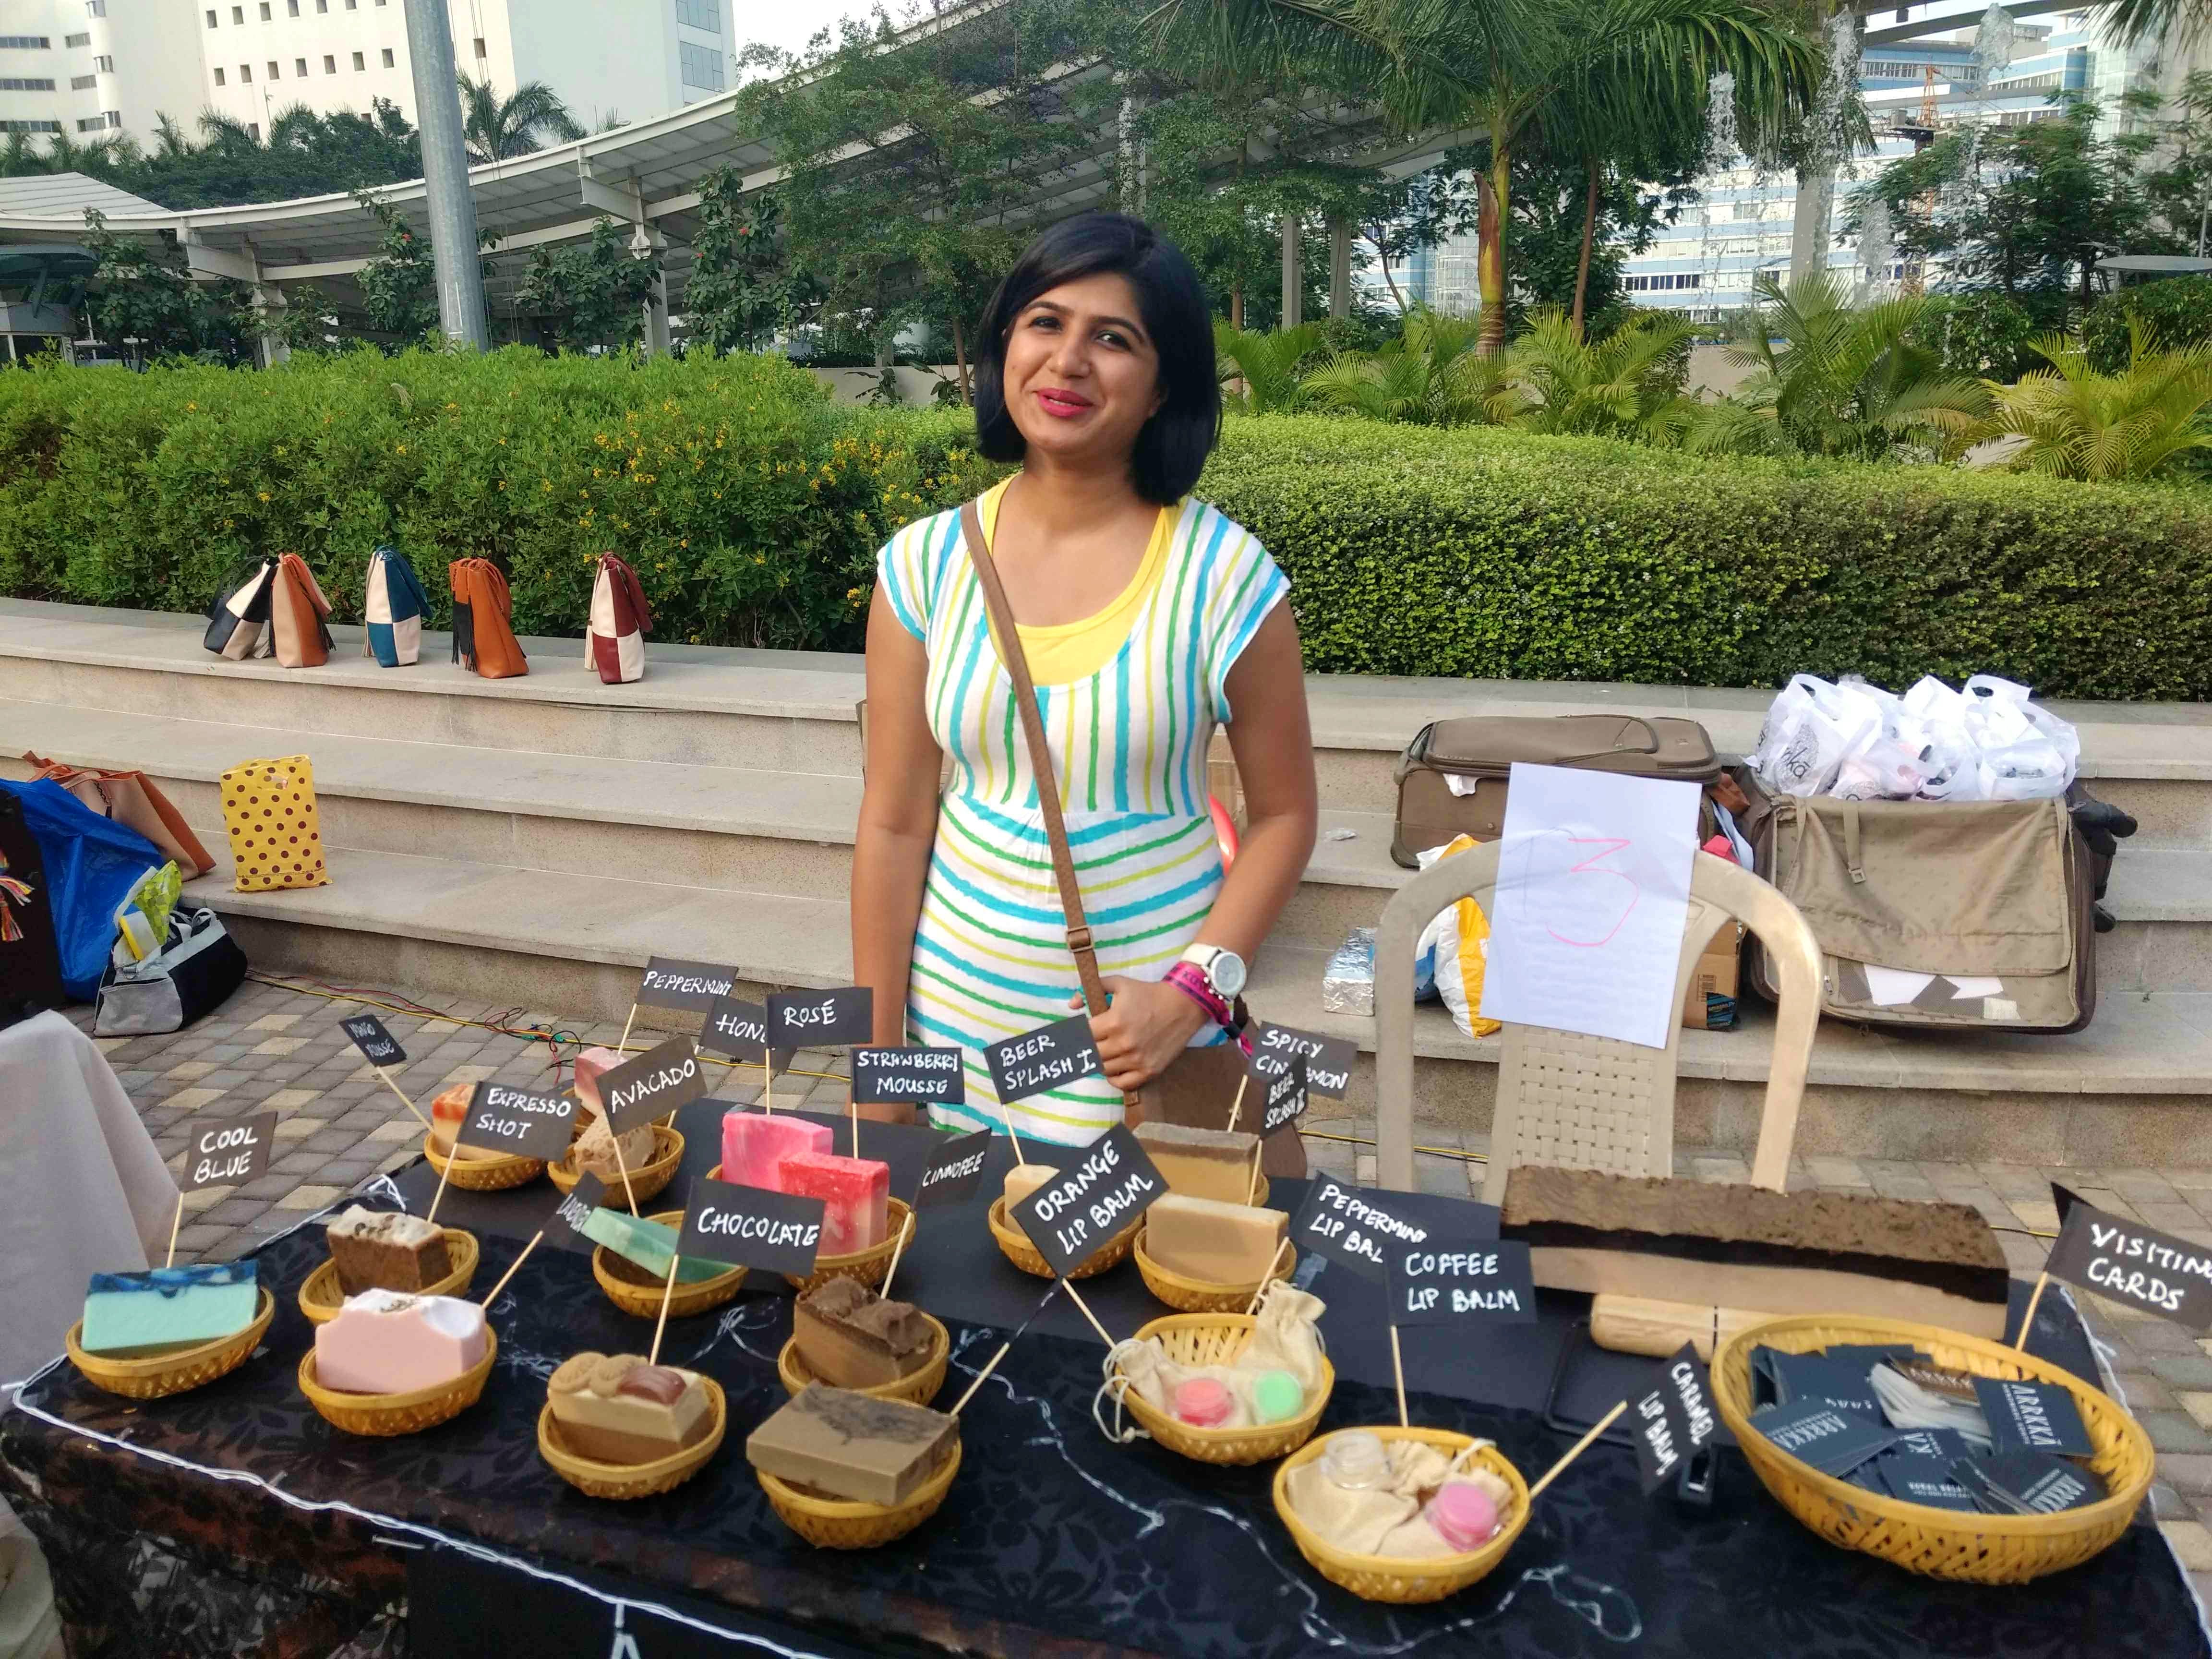 Arrkka - a cool stall at L'il Flea selling handmade soaps and lip balms in cool varieties like chocolate, beer, peppermint, espresso,strawberry mousse and caramel. Stall no.T3. Komal is available at 9004332457 and delivers all over Mumbai.She's also at L'il Flea tomorrow and next weekend..so RUSH!!